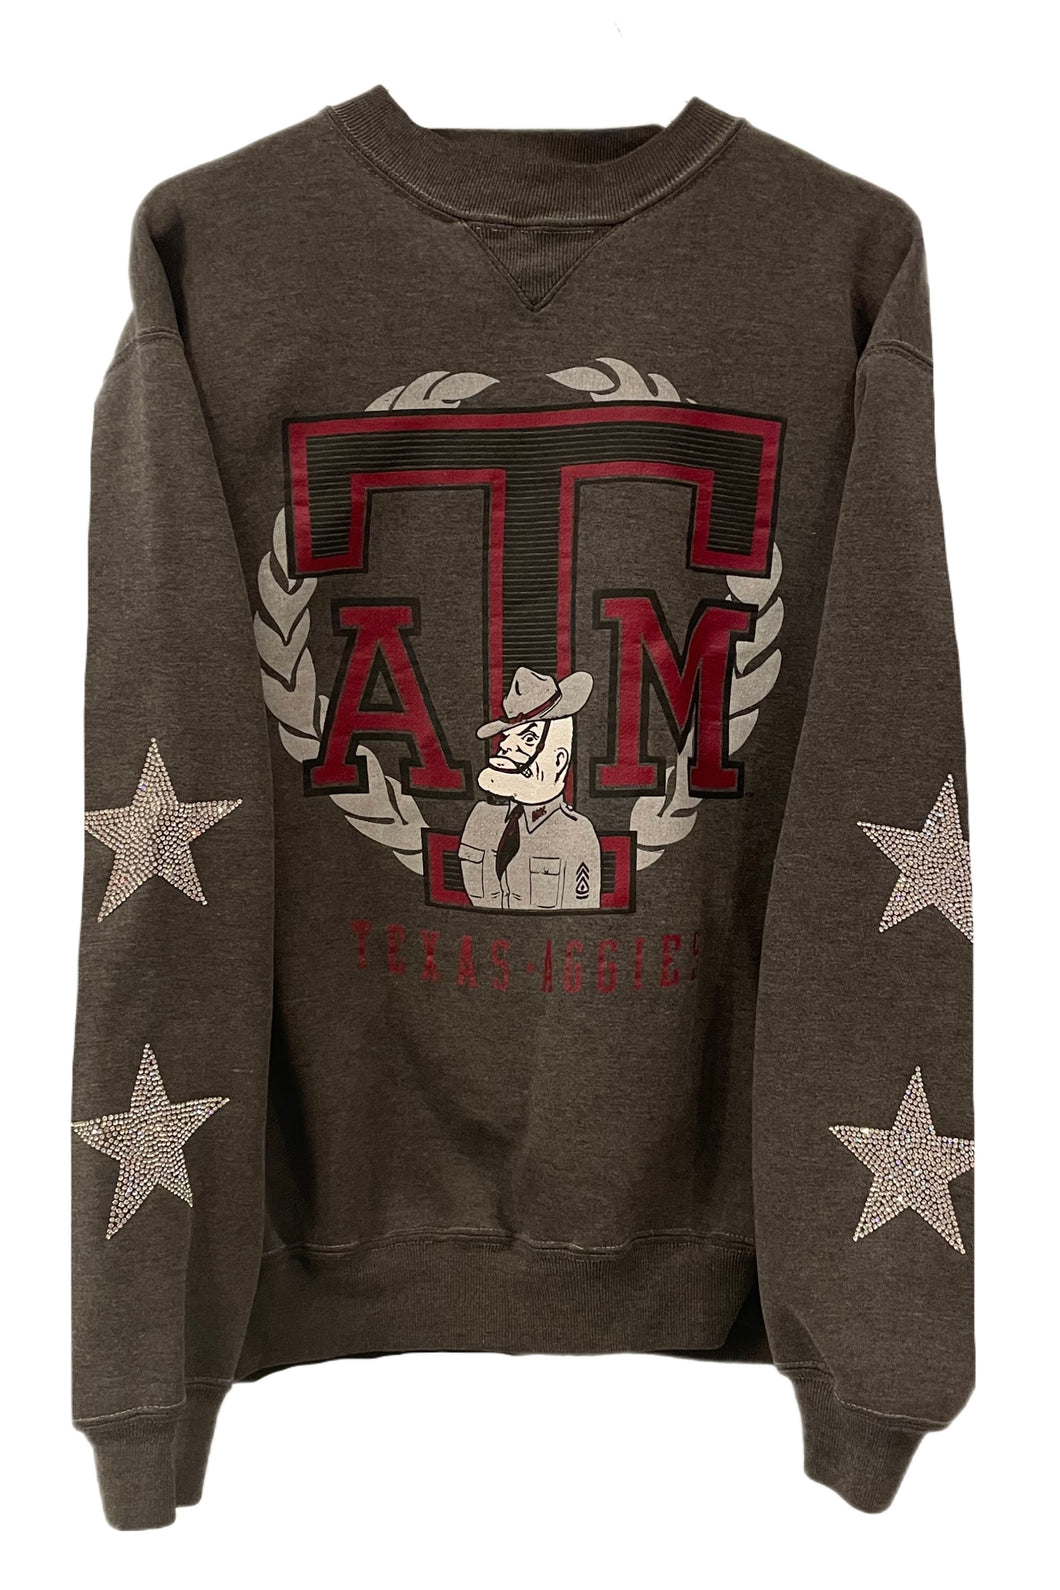 Texas A&M Commerce, One of a KIND Vintage “Rare Find” Sweatshirt with Crystal Star Design